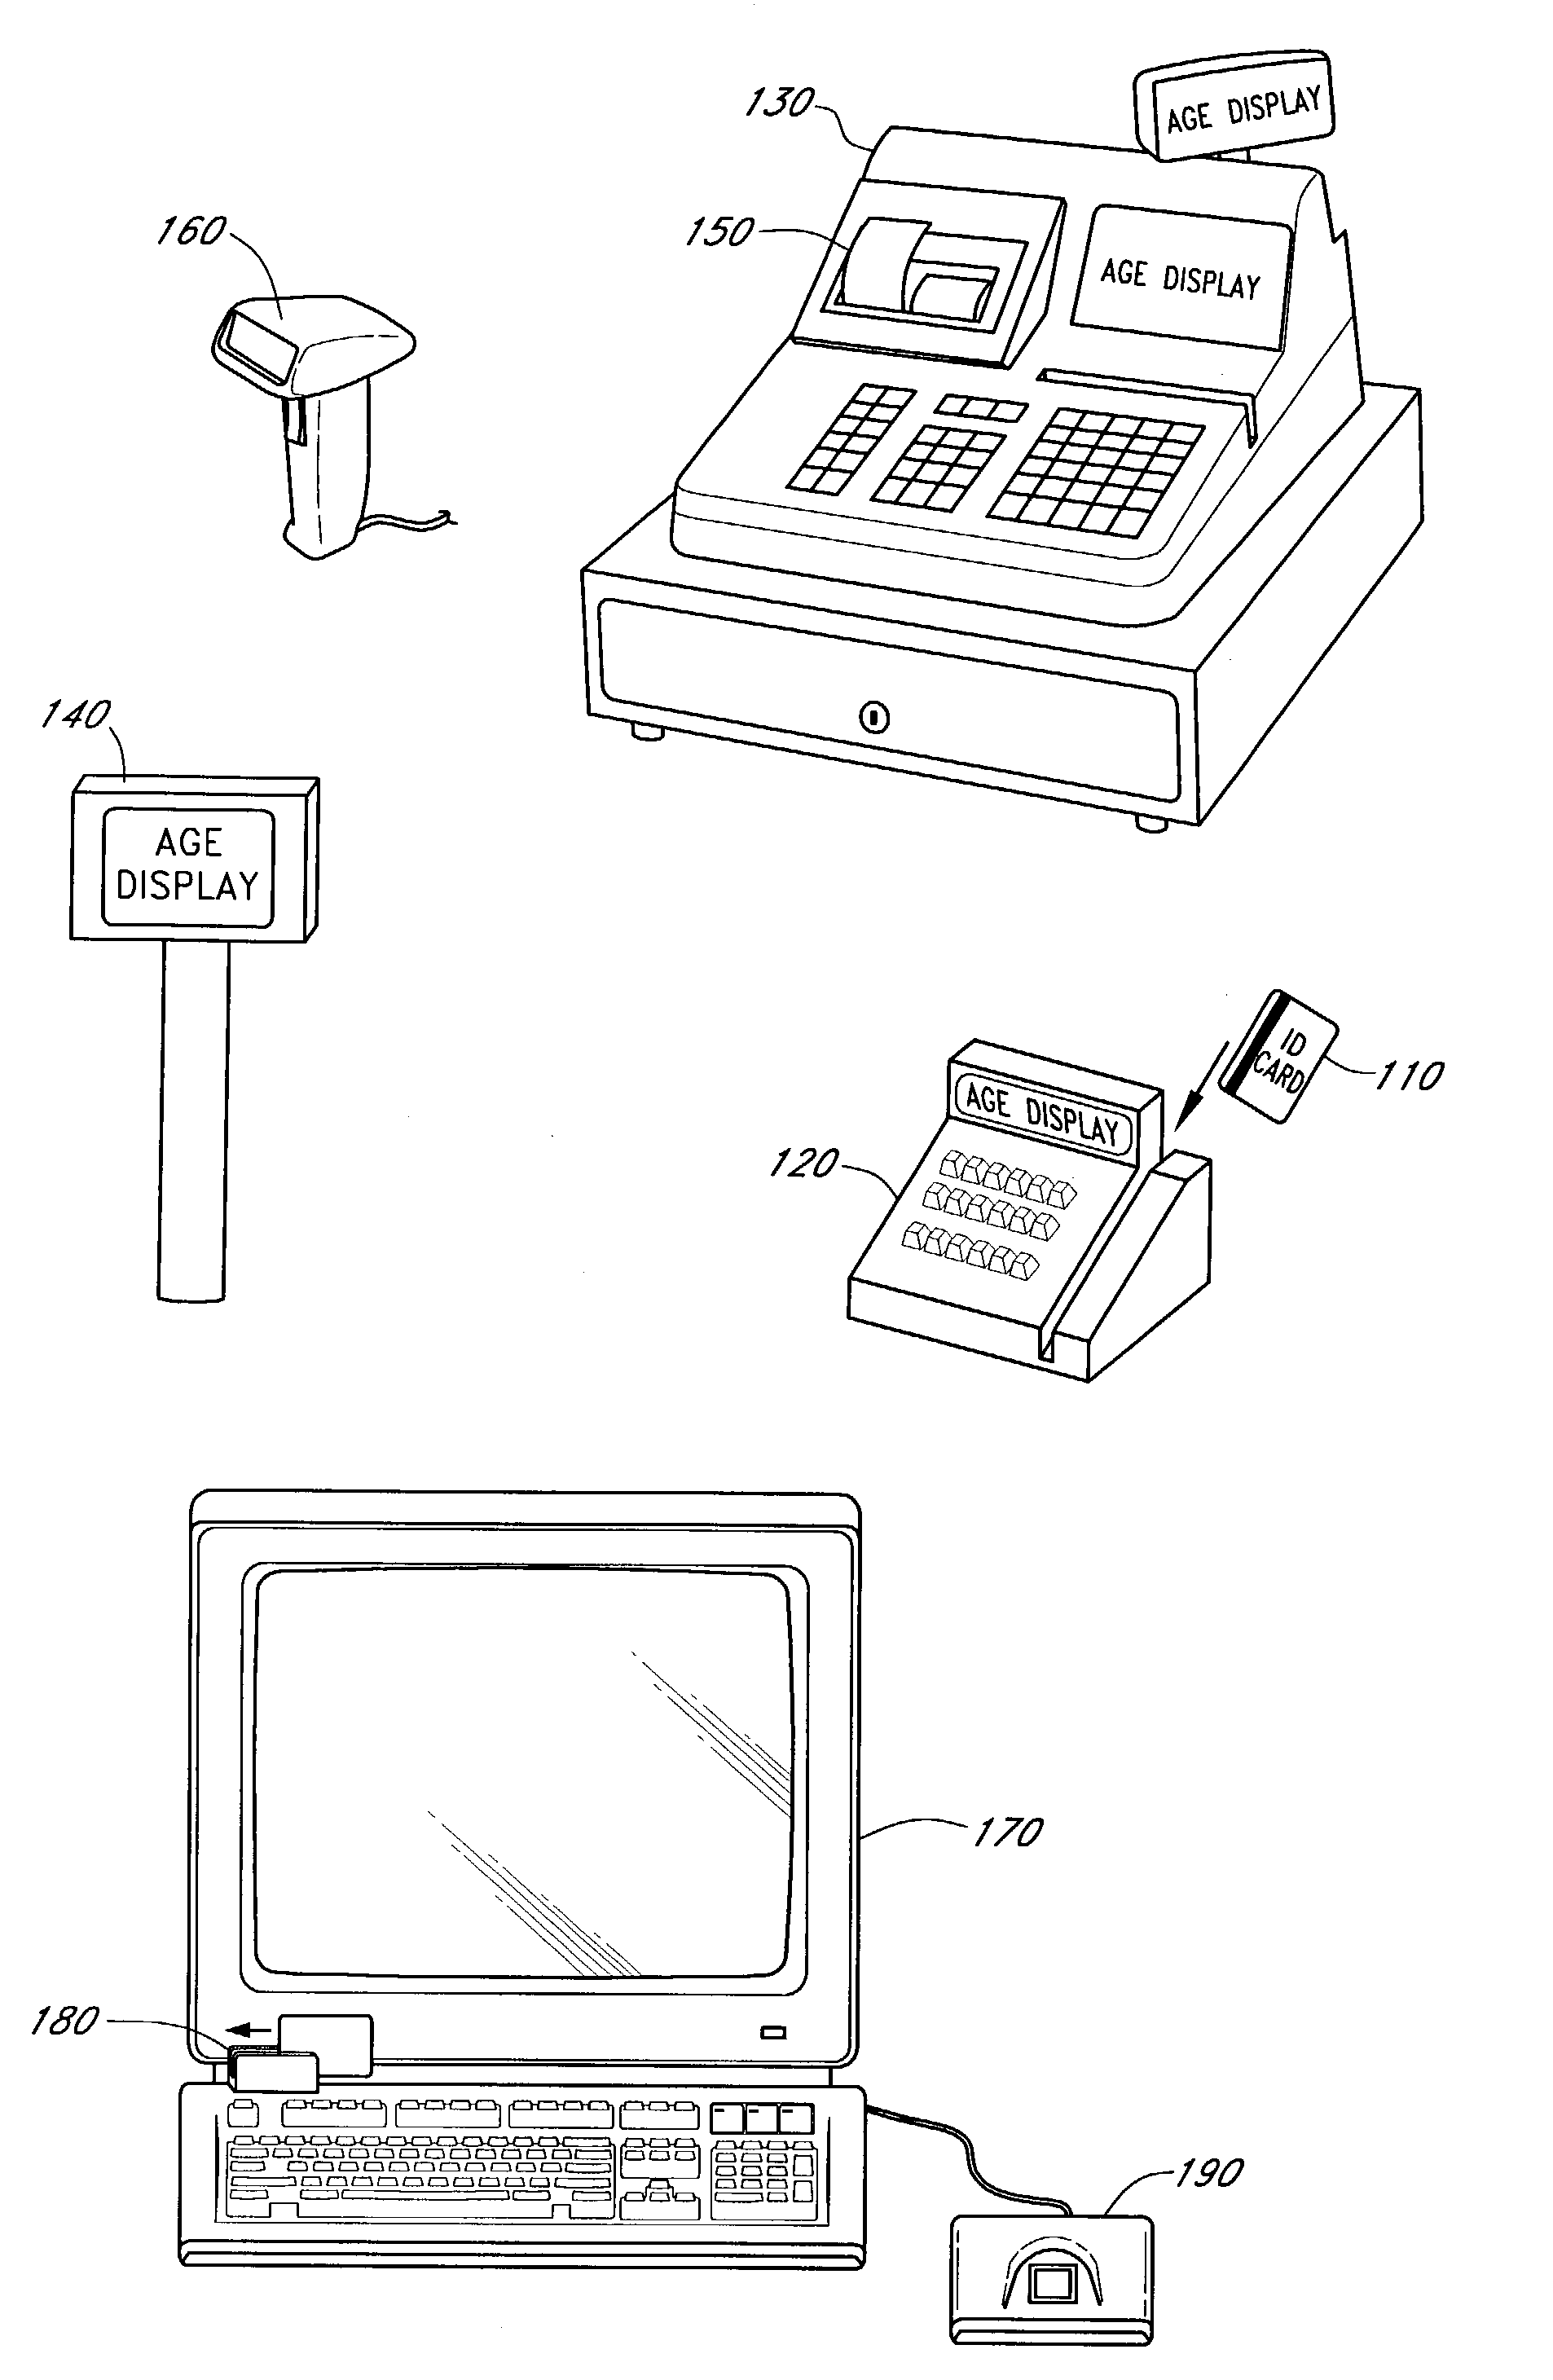 Systems and methods for determining a need for authorization